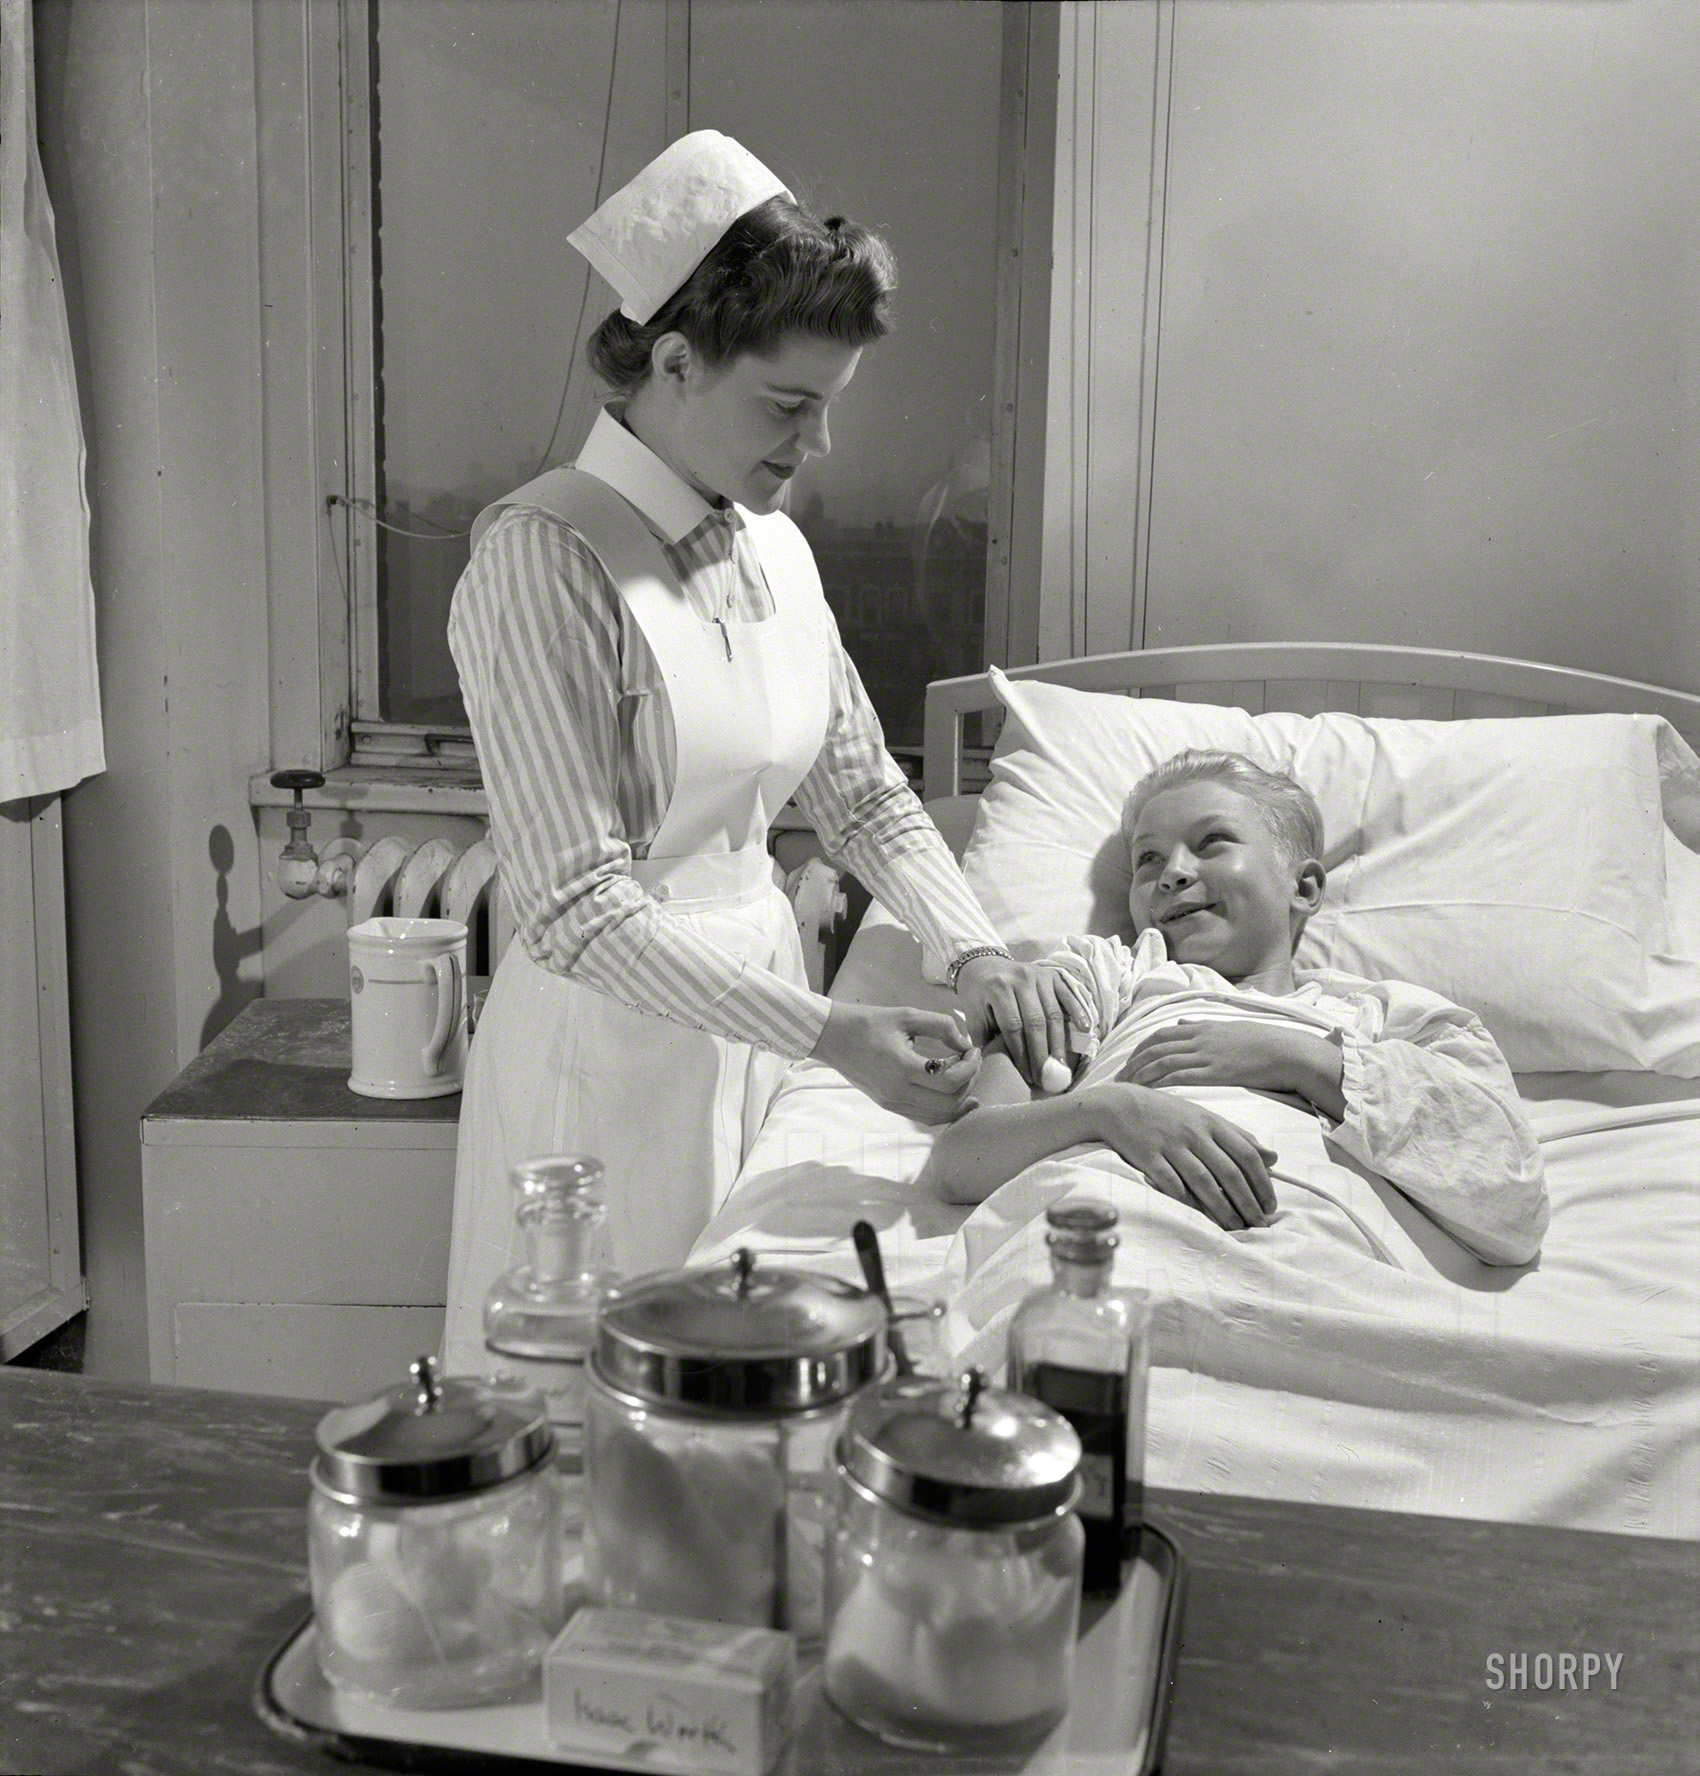 November 1942. "Nurse training at Babies' Hospital, New York. Student nurses, like Susan Petty of Lebanon, Pennsylvania, are rendering their country a great service by making it possible for experienced nurses to join the Army or Navy Nurse Corps. Relieved of such civilian duties as administering injections to patients like this smiling youngster, graduate nurses are tending America's fighting men in distant parts of the world." Medium format negative by Fritz Henle for the Office of War Information. View full size.